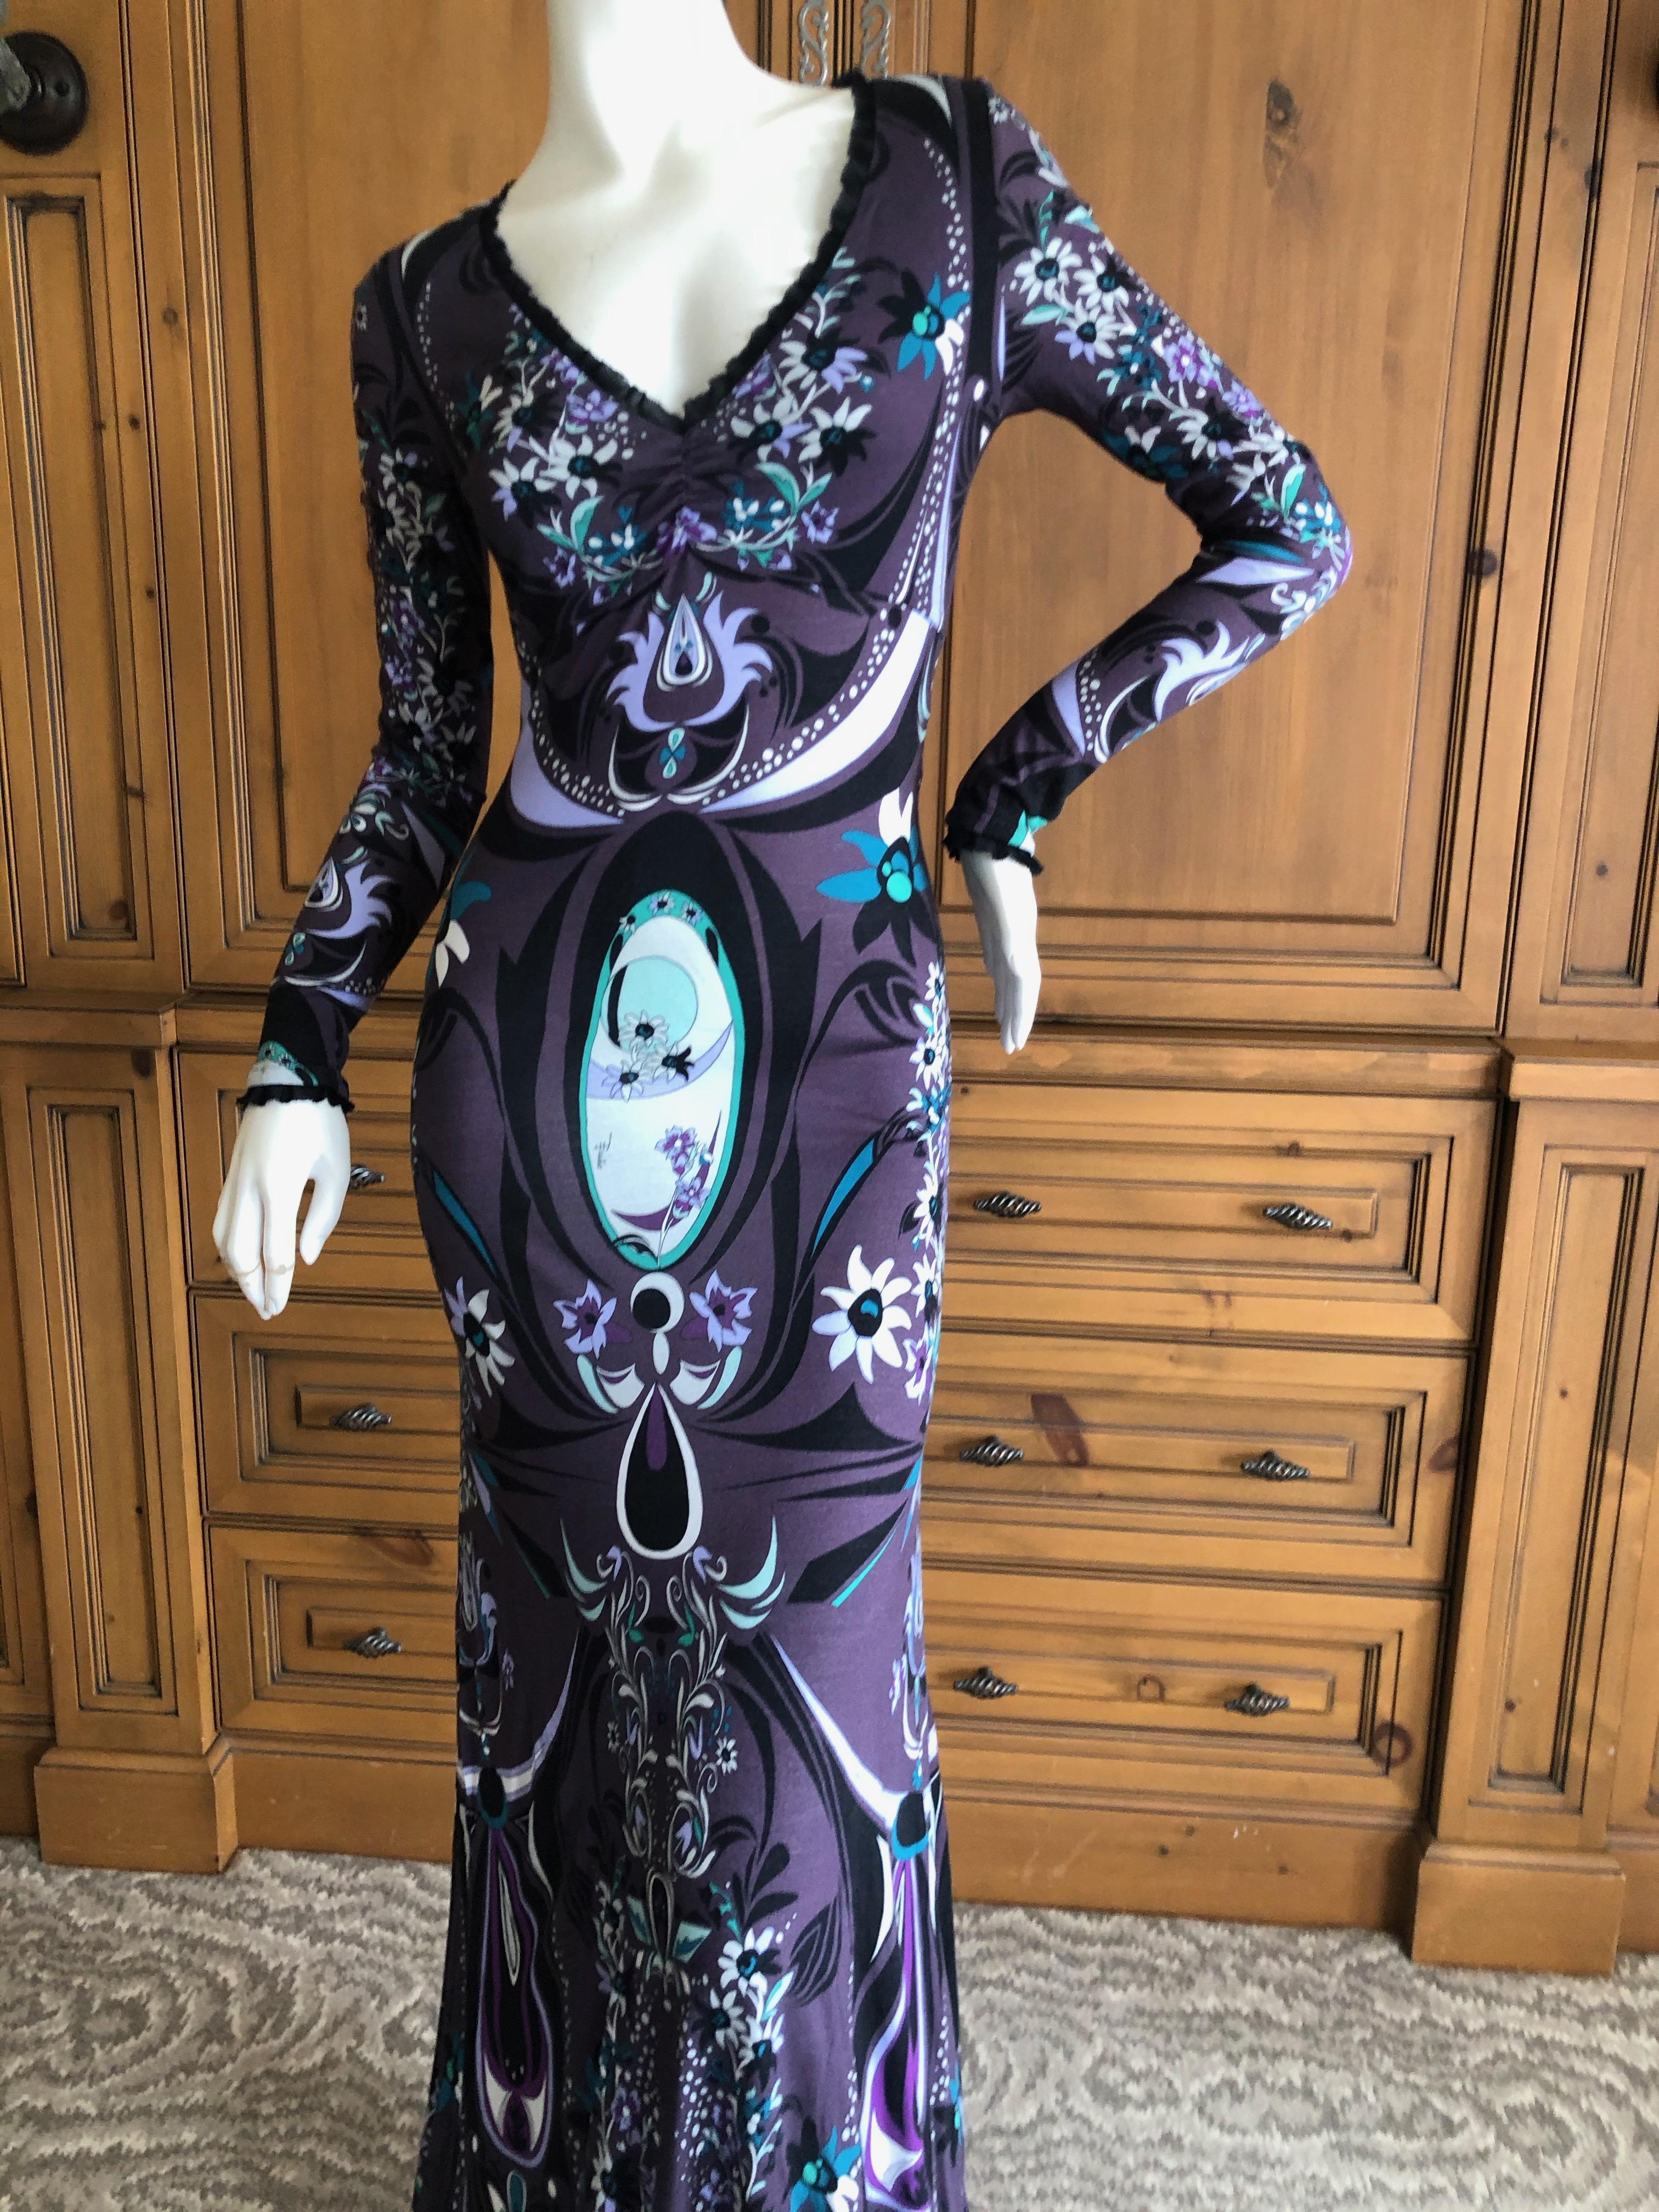 Emilio Pucci Low Cut Evening Dress with Lace Trim In Excellent Condition For Sale In Cloverdale, CA